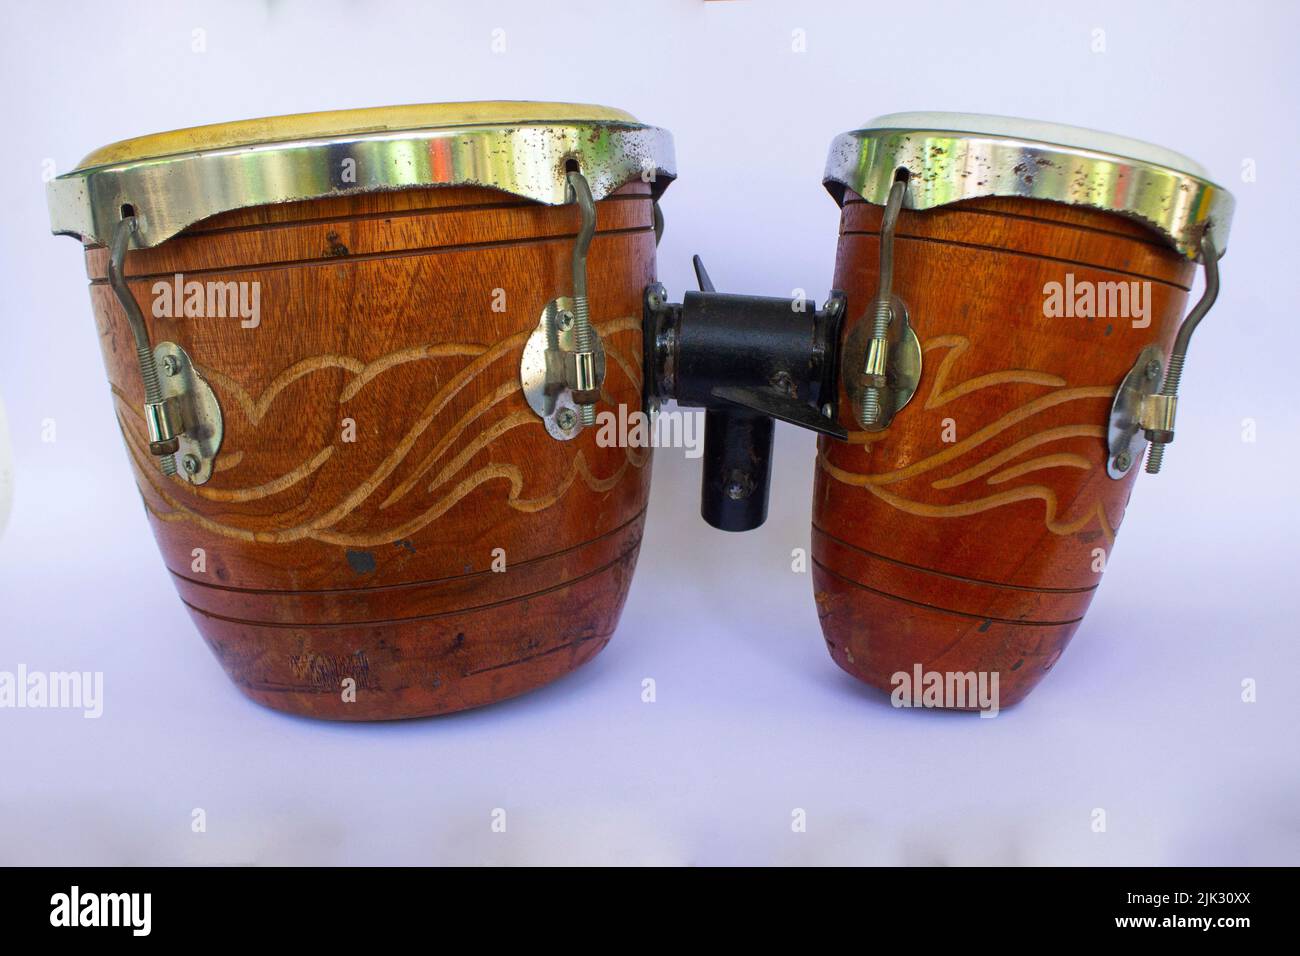 kendang , ketipung isolated on white background. Kendhang javanese Kendhang, TausugBajau Maranao Gandang ketipung is a two-headed drum used from indon Stock Photo